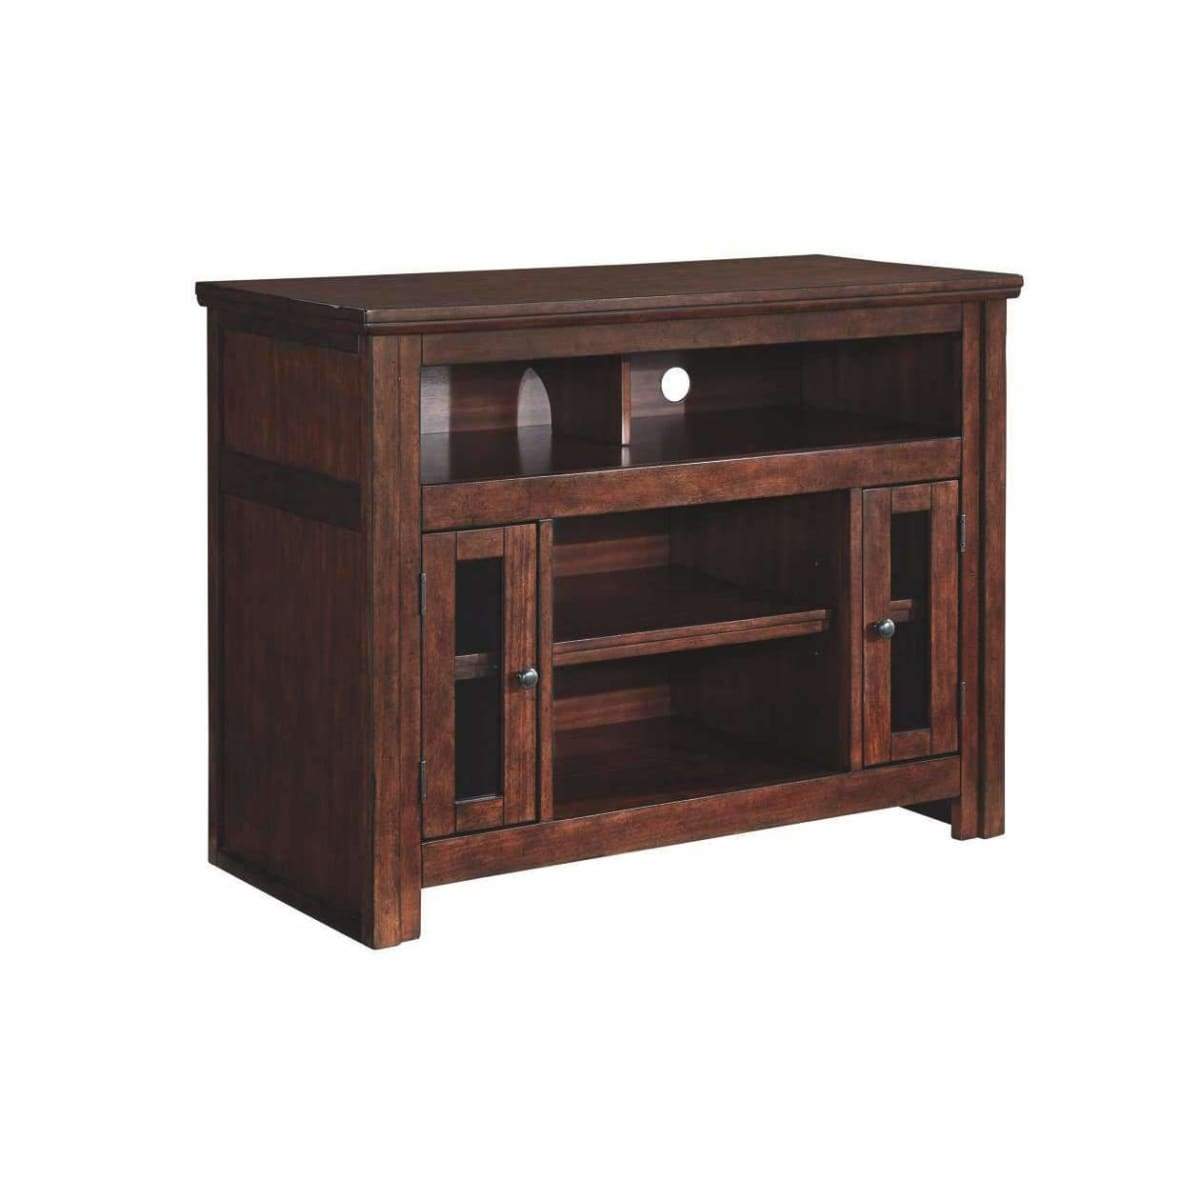 Harpan 42 TV Stand - ENTERTAINMENT CONSOLE